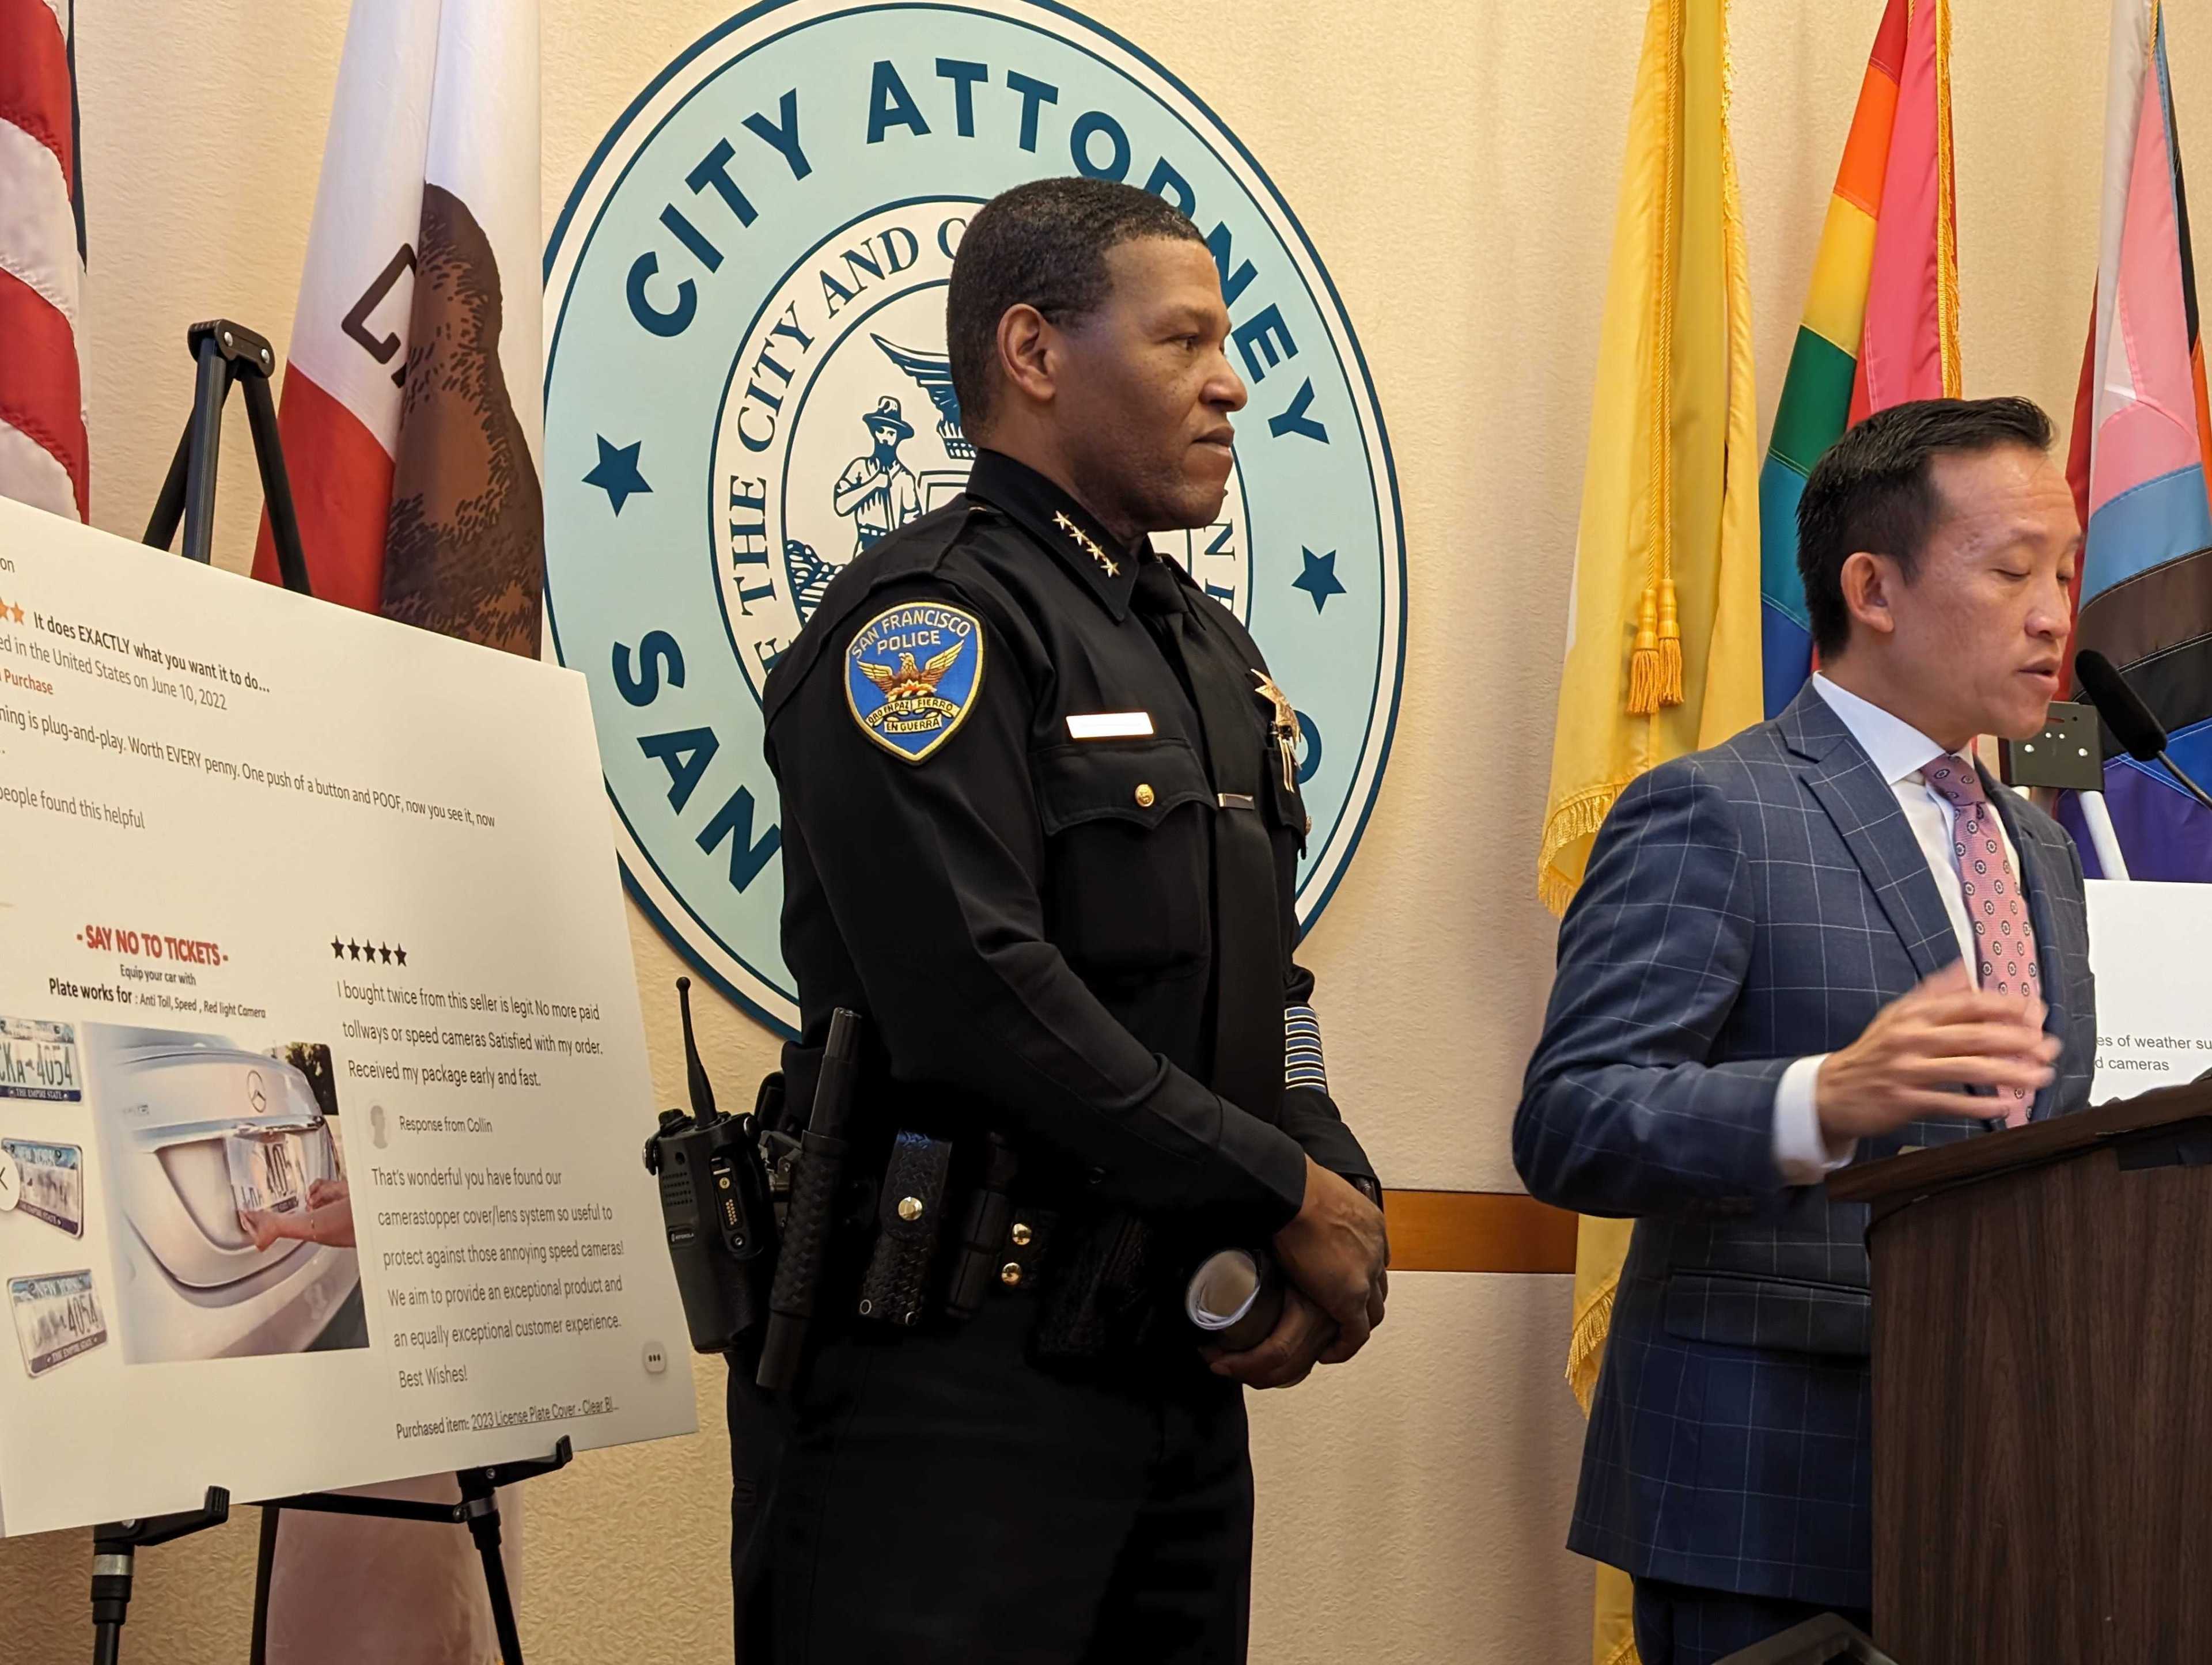 A uniformed police chief stands beside a placard showing images and online reviews of illegal license plate holders. The chief actively listens to a suit-wearing man standing beside him at a podium and speaking at a press conference. A San Francisco City Attorney seal and American, state, city and pride flags stand on a wall behind the two men.